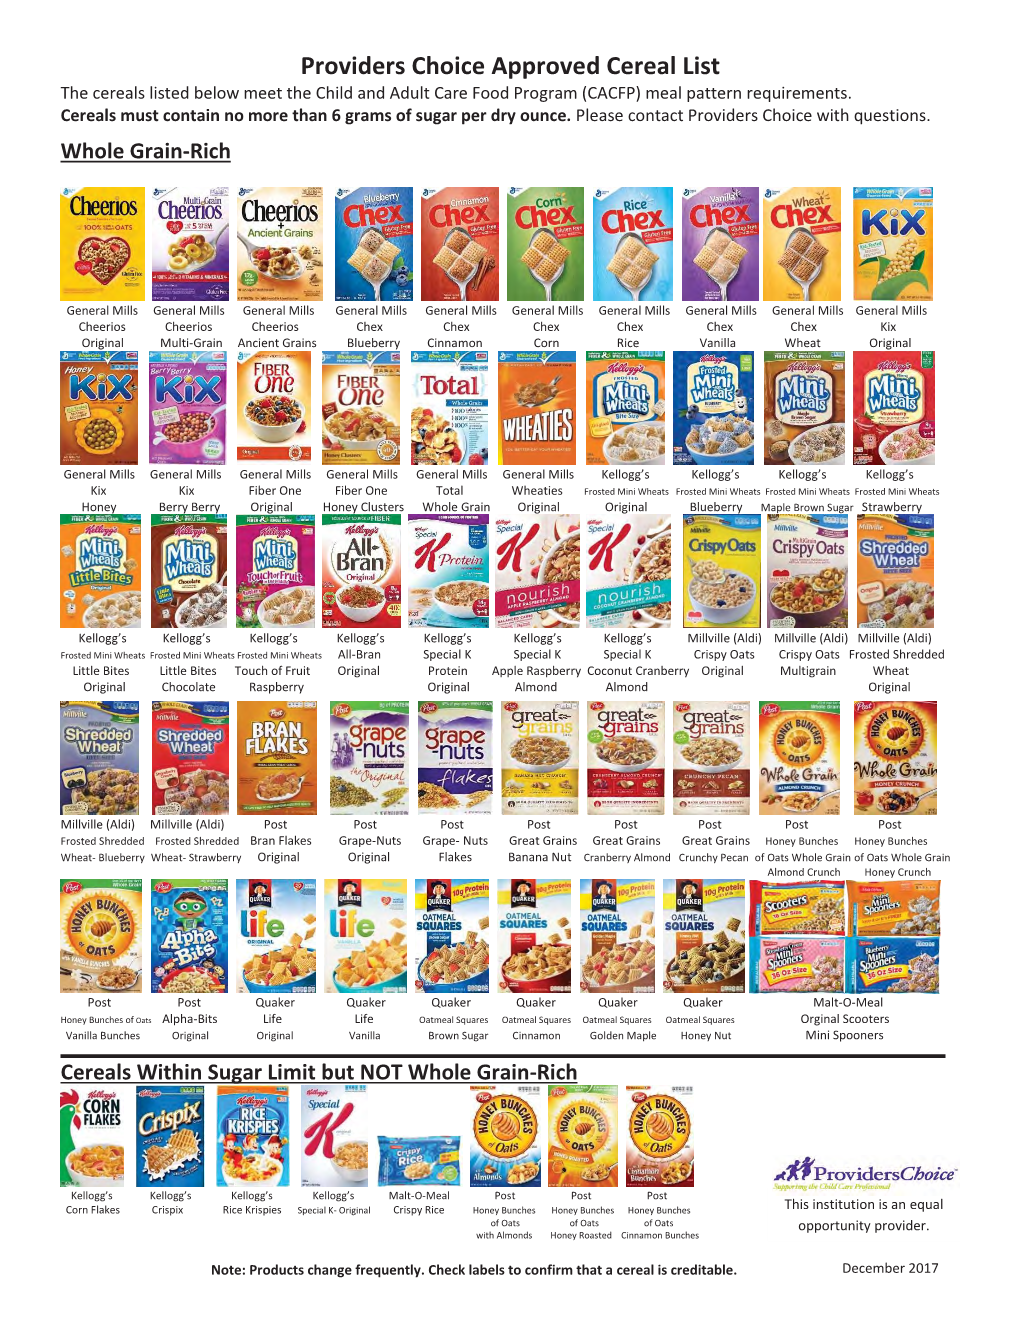 Approved Cereal List the Cereals Listed Below Meet the Child and Adult Care Food Program (CACFP) Meal Pattern Requirements